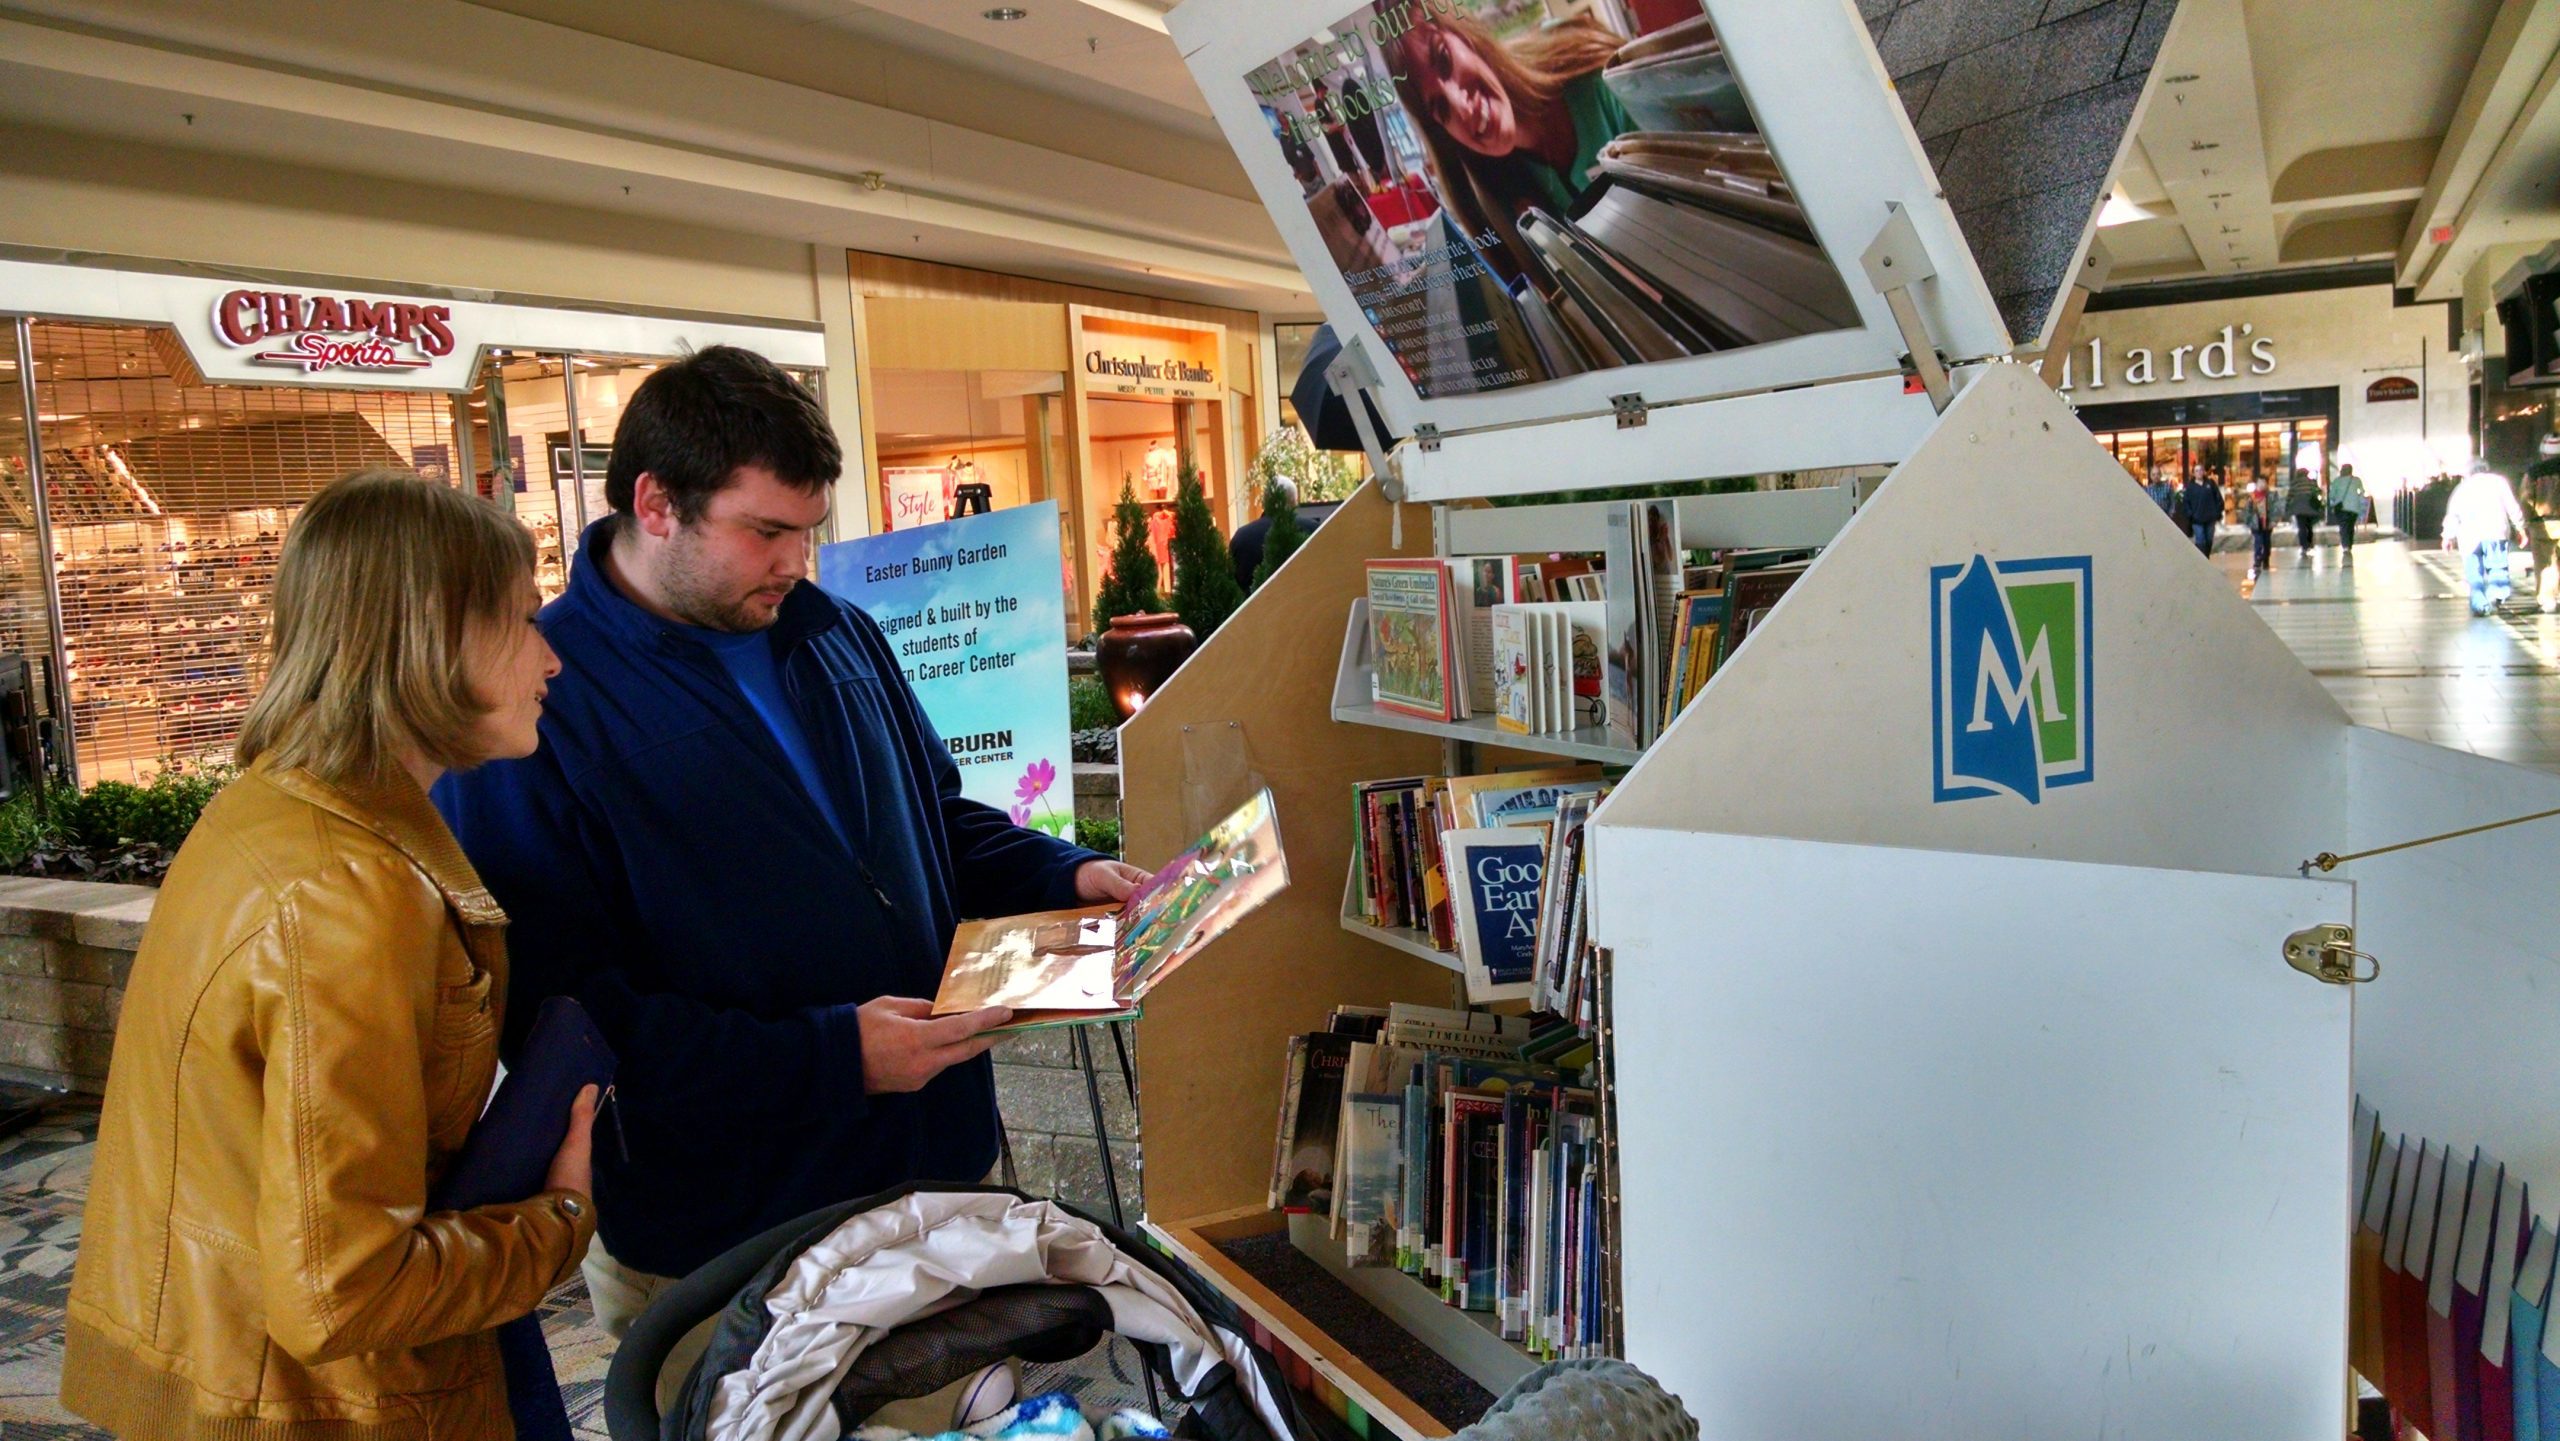 A family glances at the books in the Pop-Up Library while shopping at Great Lakes Mall.